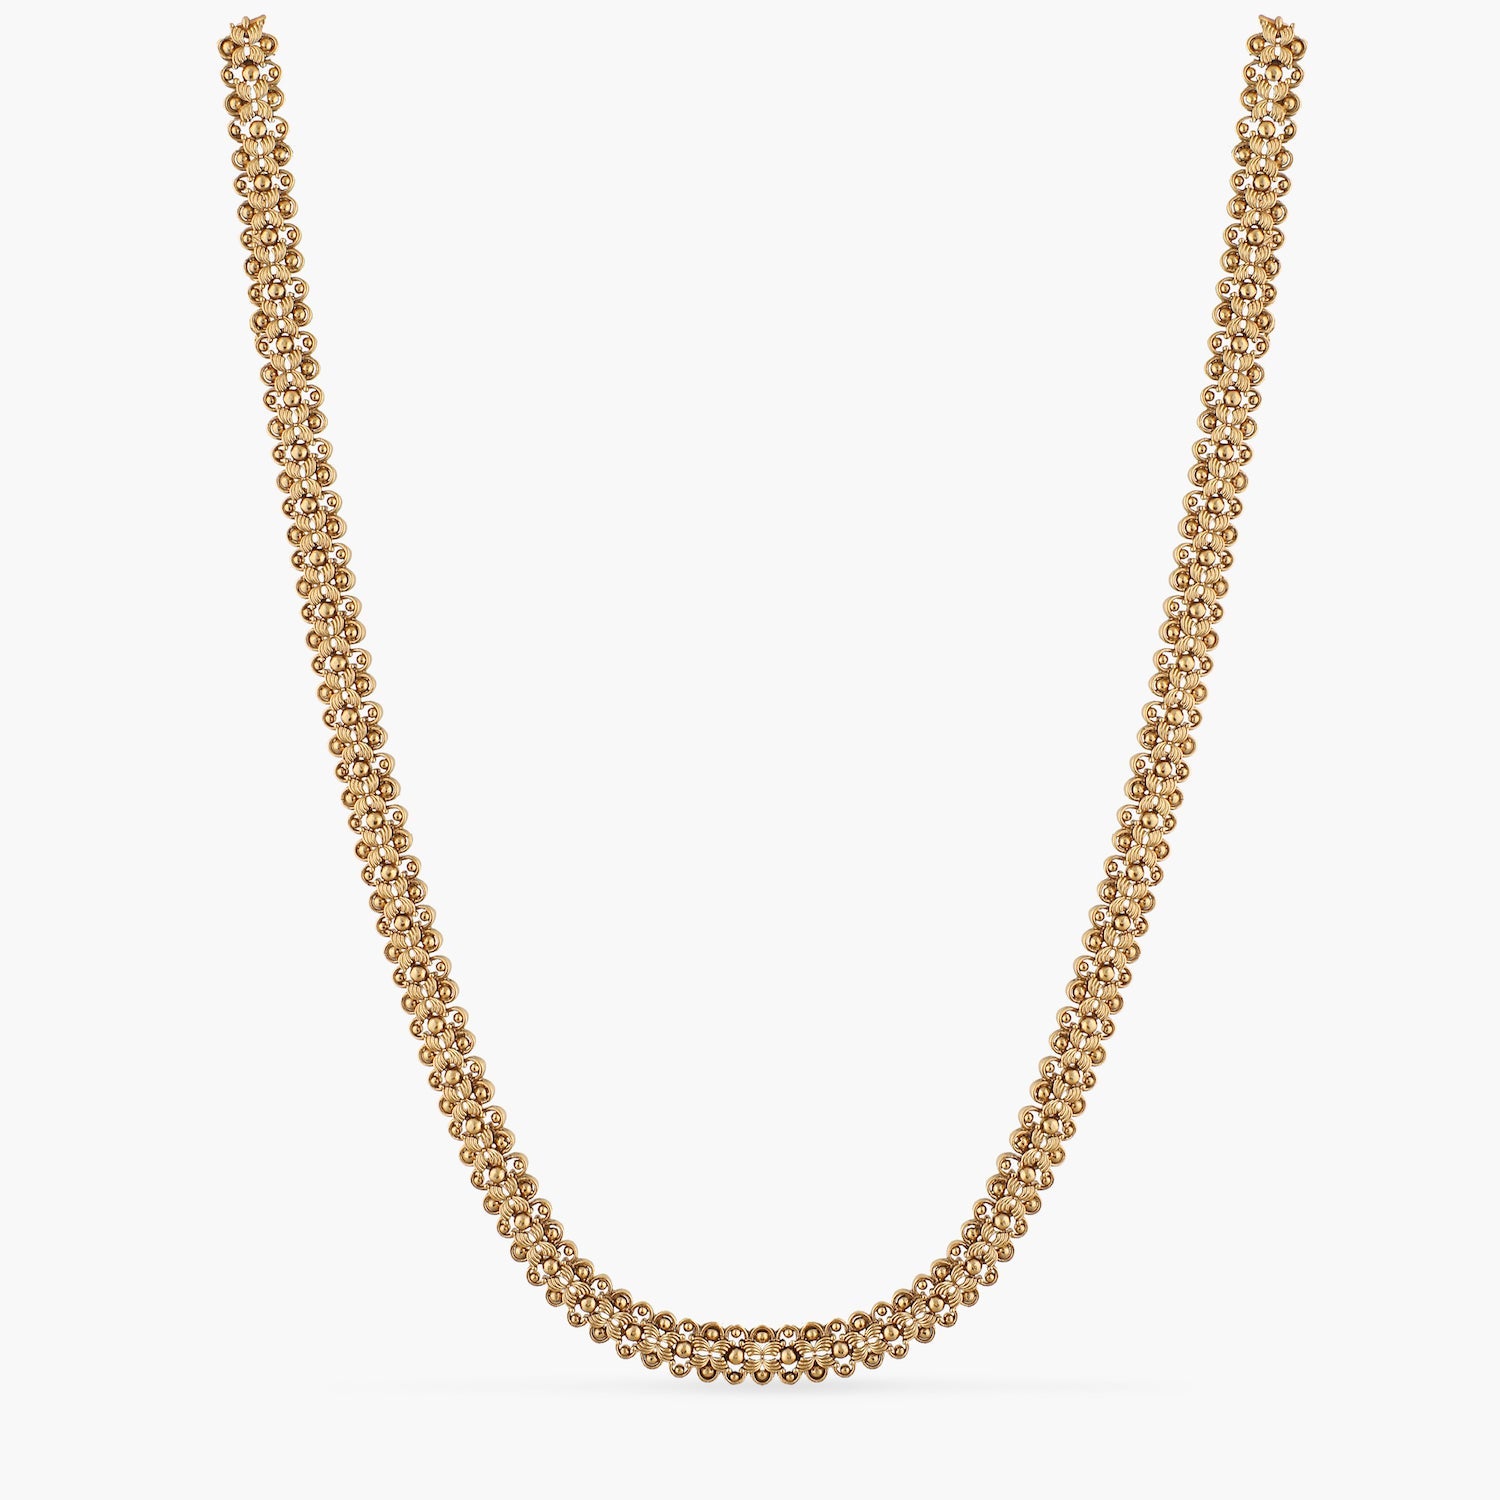 Hermes Gold Plated Tribal Long Necklace